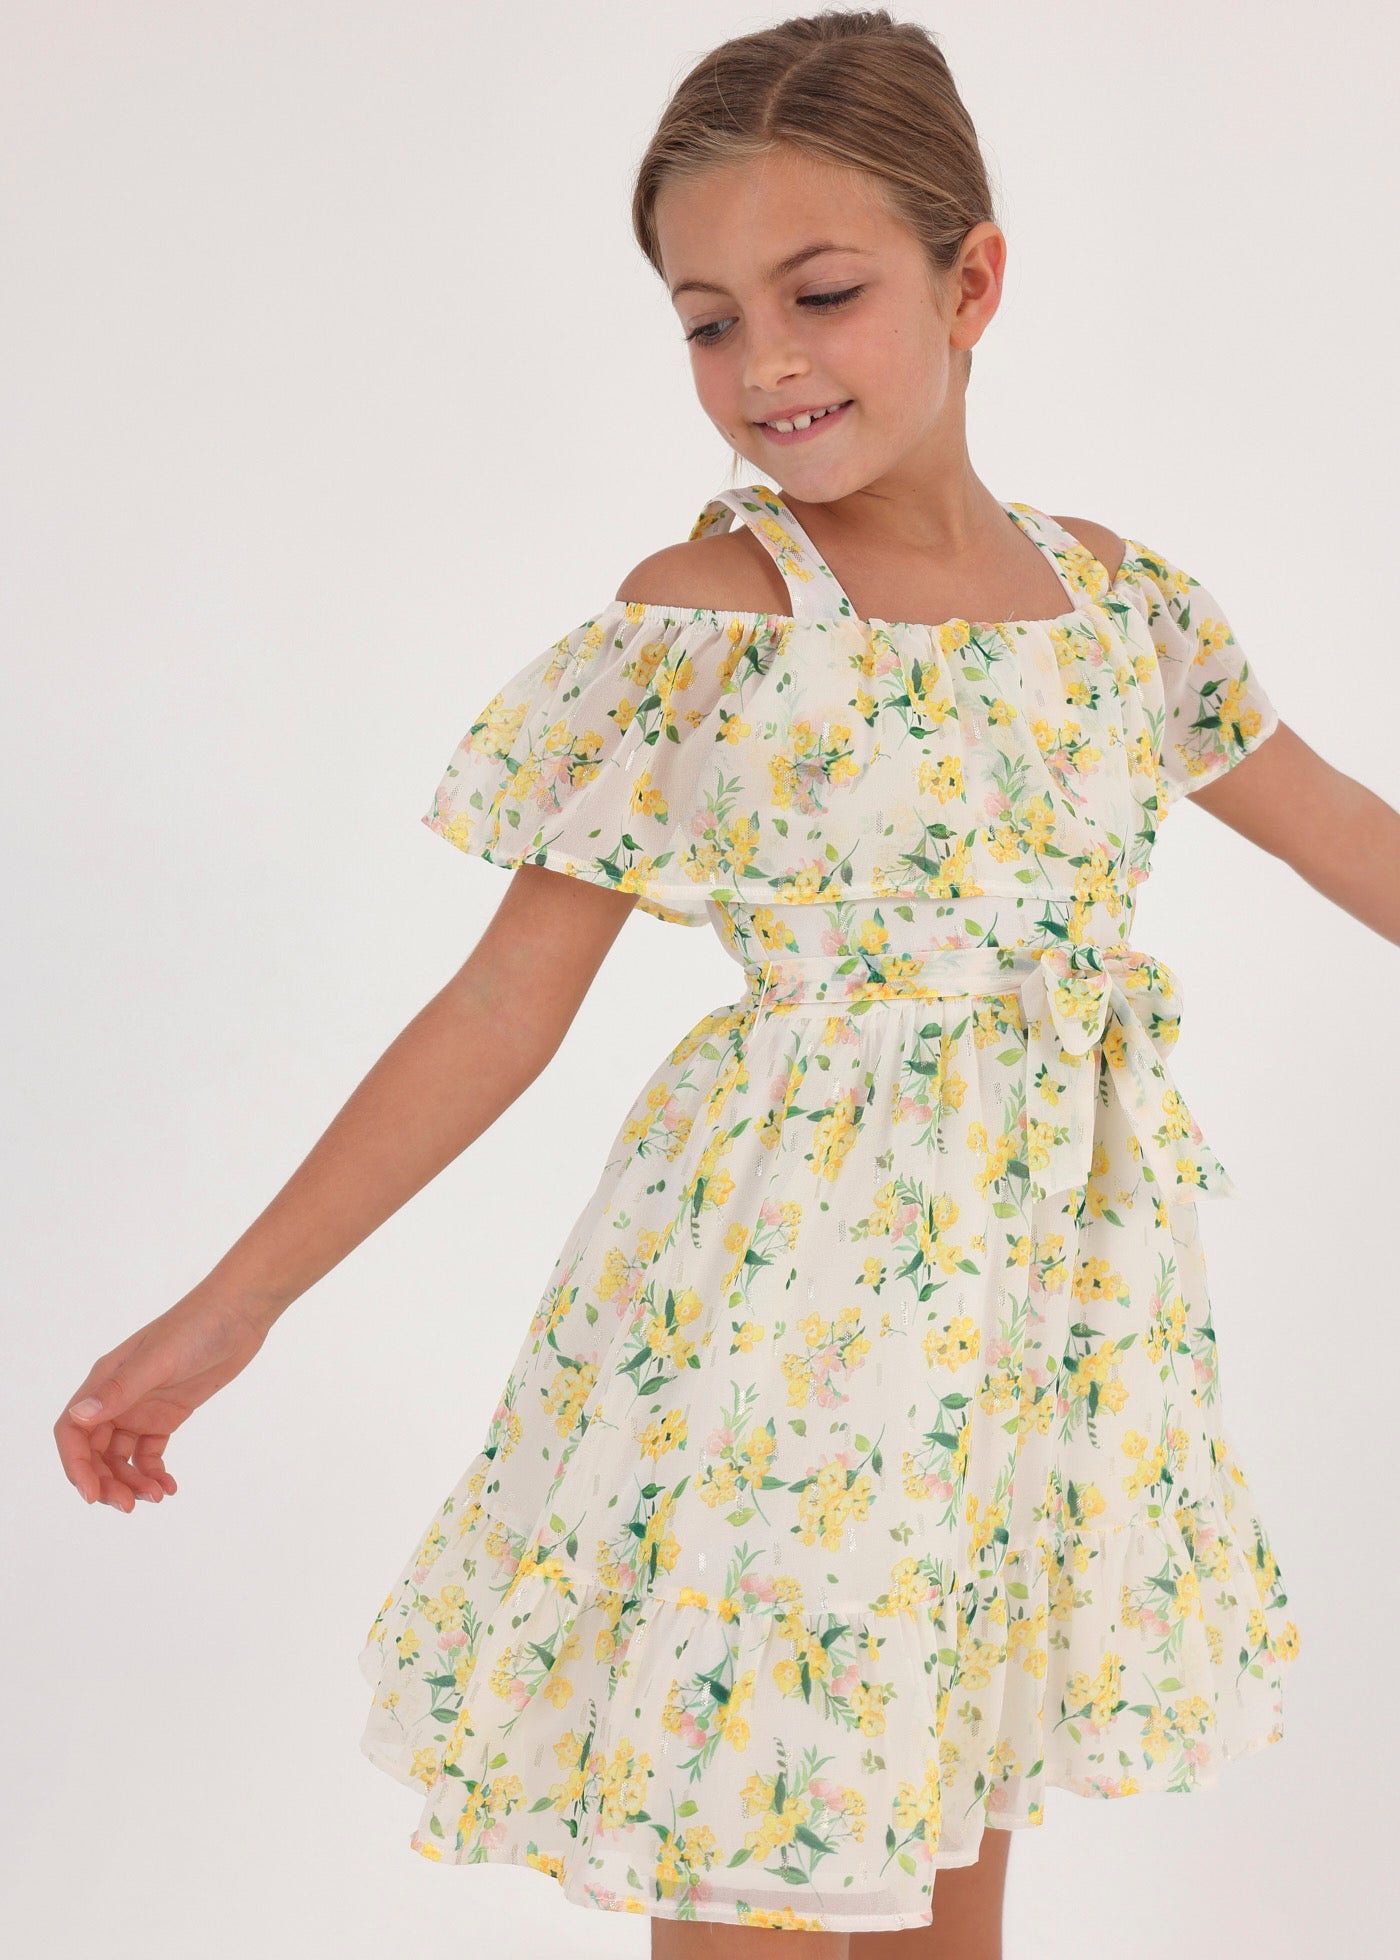 Mayoral Junior Off The Shoulder Dress w/Floral Pattern _White/Yellow 6913-019